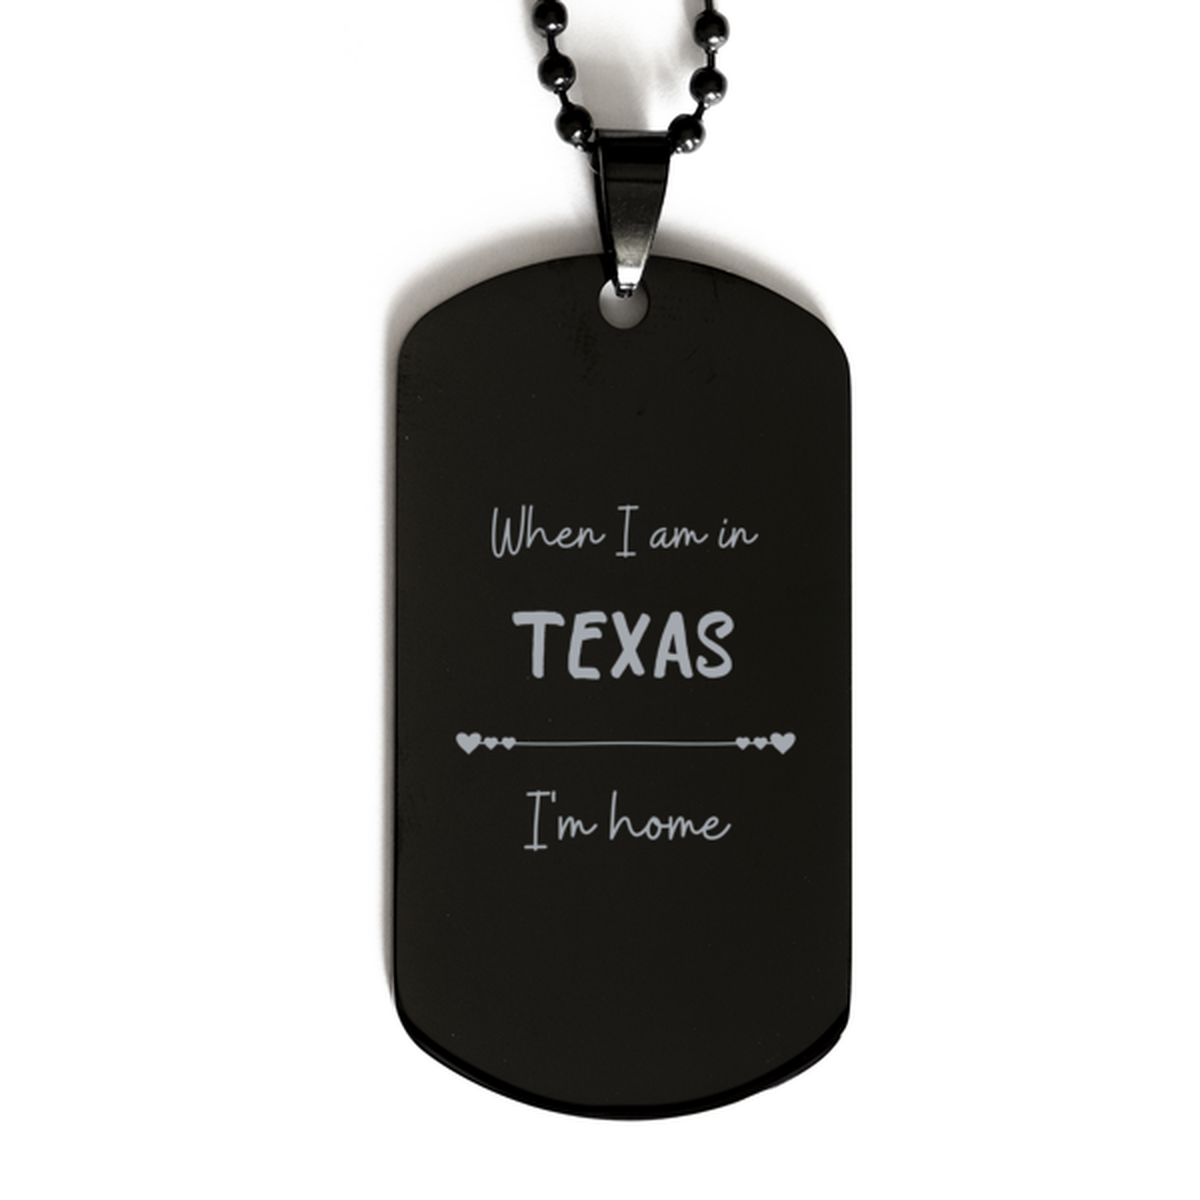 When I am in Texas I'm home Black Dog Tag, Cheap Gifts For Texas, State Texas Birthday Gifts for Friends Coworker